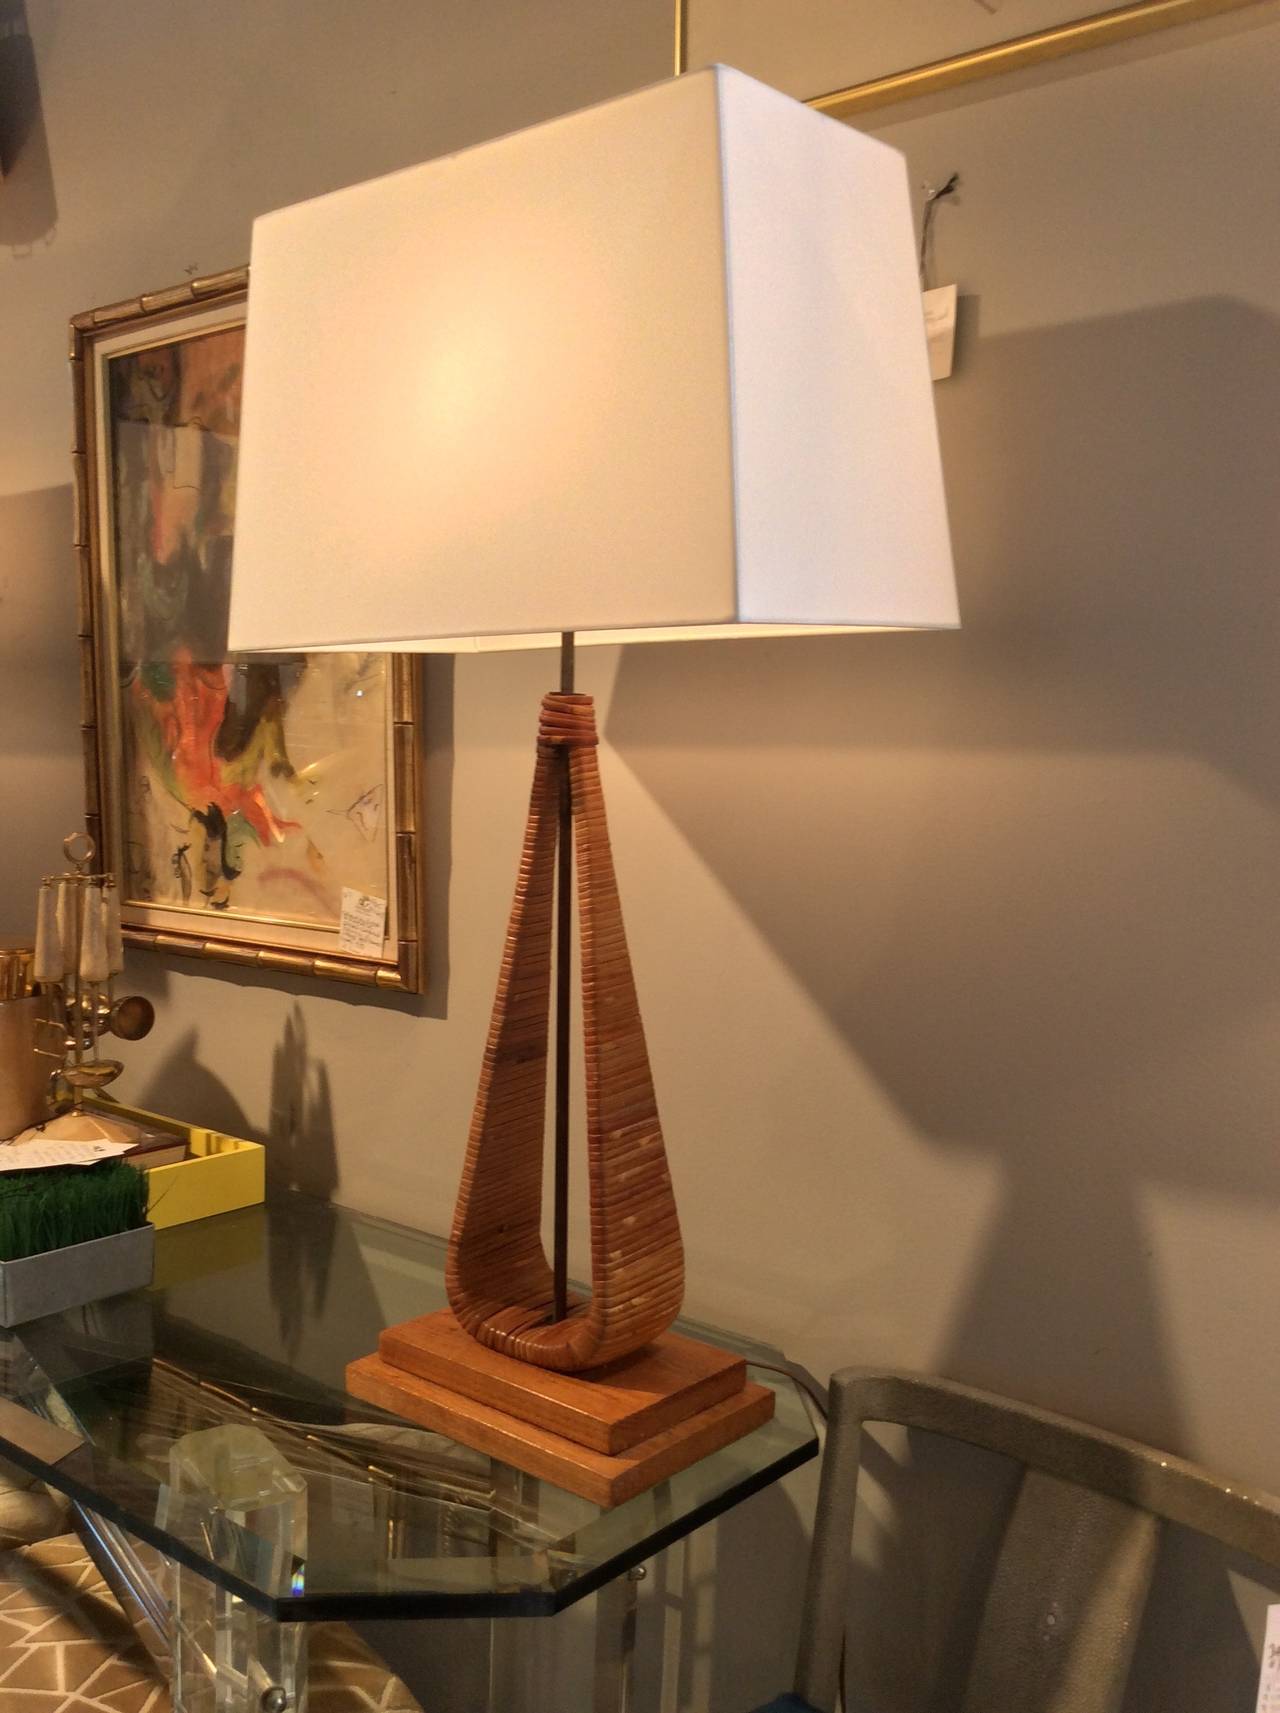 Vintage pair of sculptural cane lamps, style of Frederic Weinberg or Arthur Umanoff. Tear drop form bodies wrapped in lacquered wicker, with oak tiered plinth bases. Concealed (new) wiring in iron rod and finished with bamboo finial. 
Dimensions